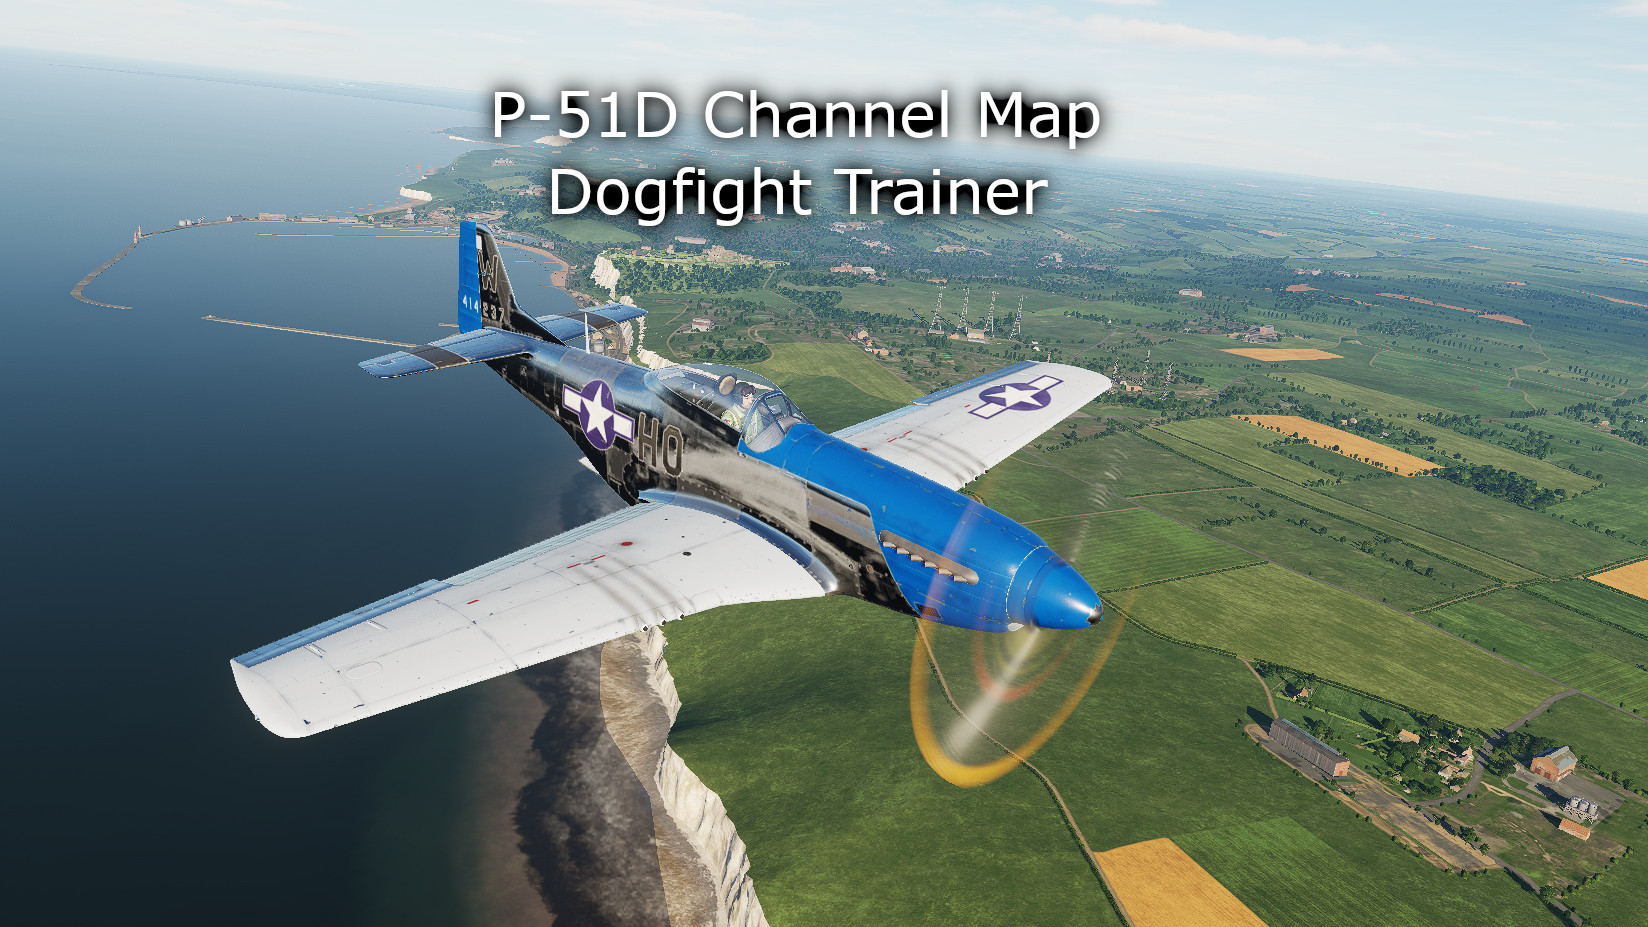 P-51 Channel Dogfight Training